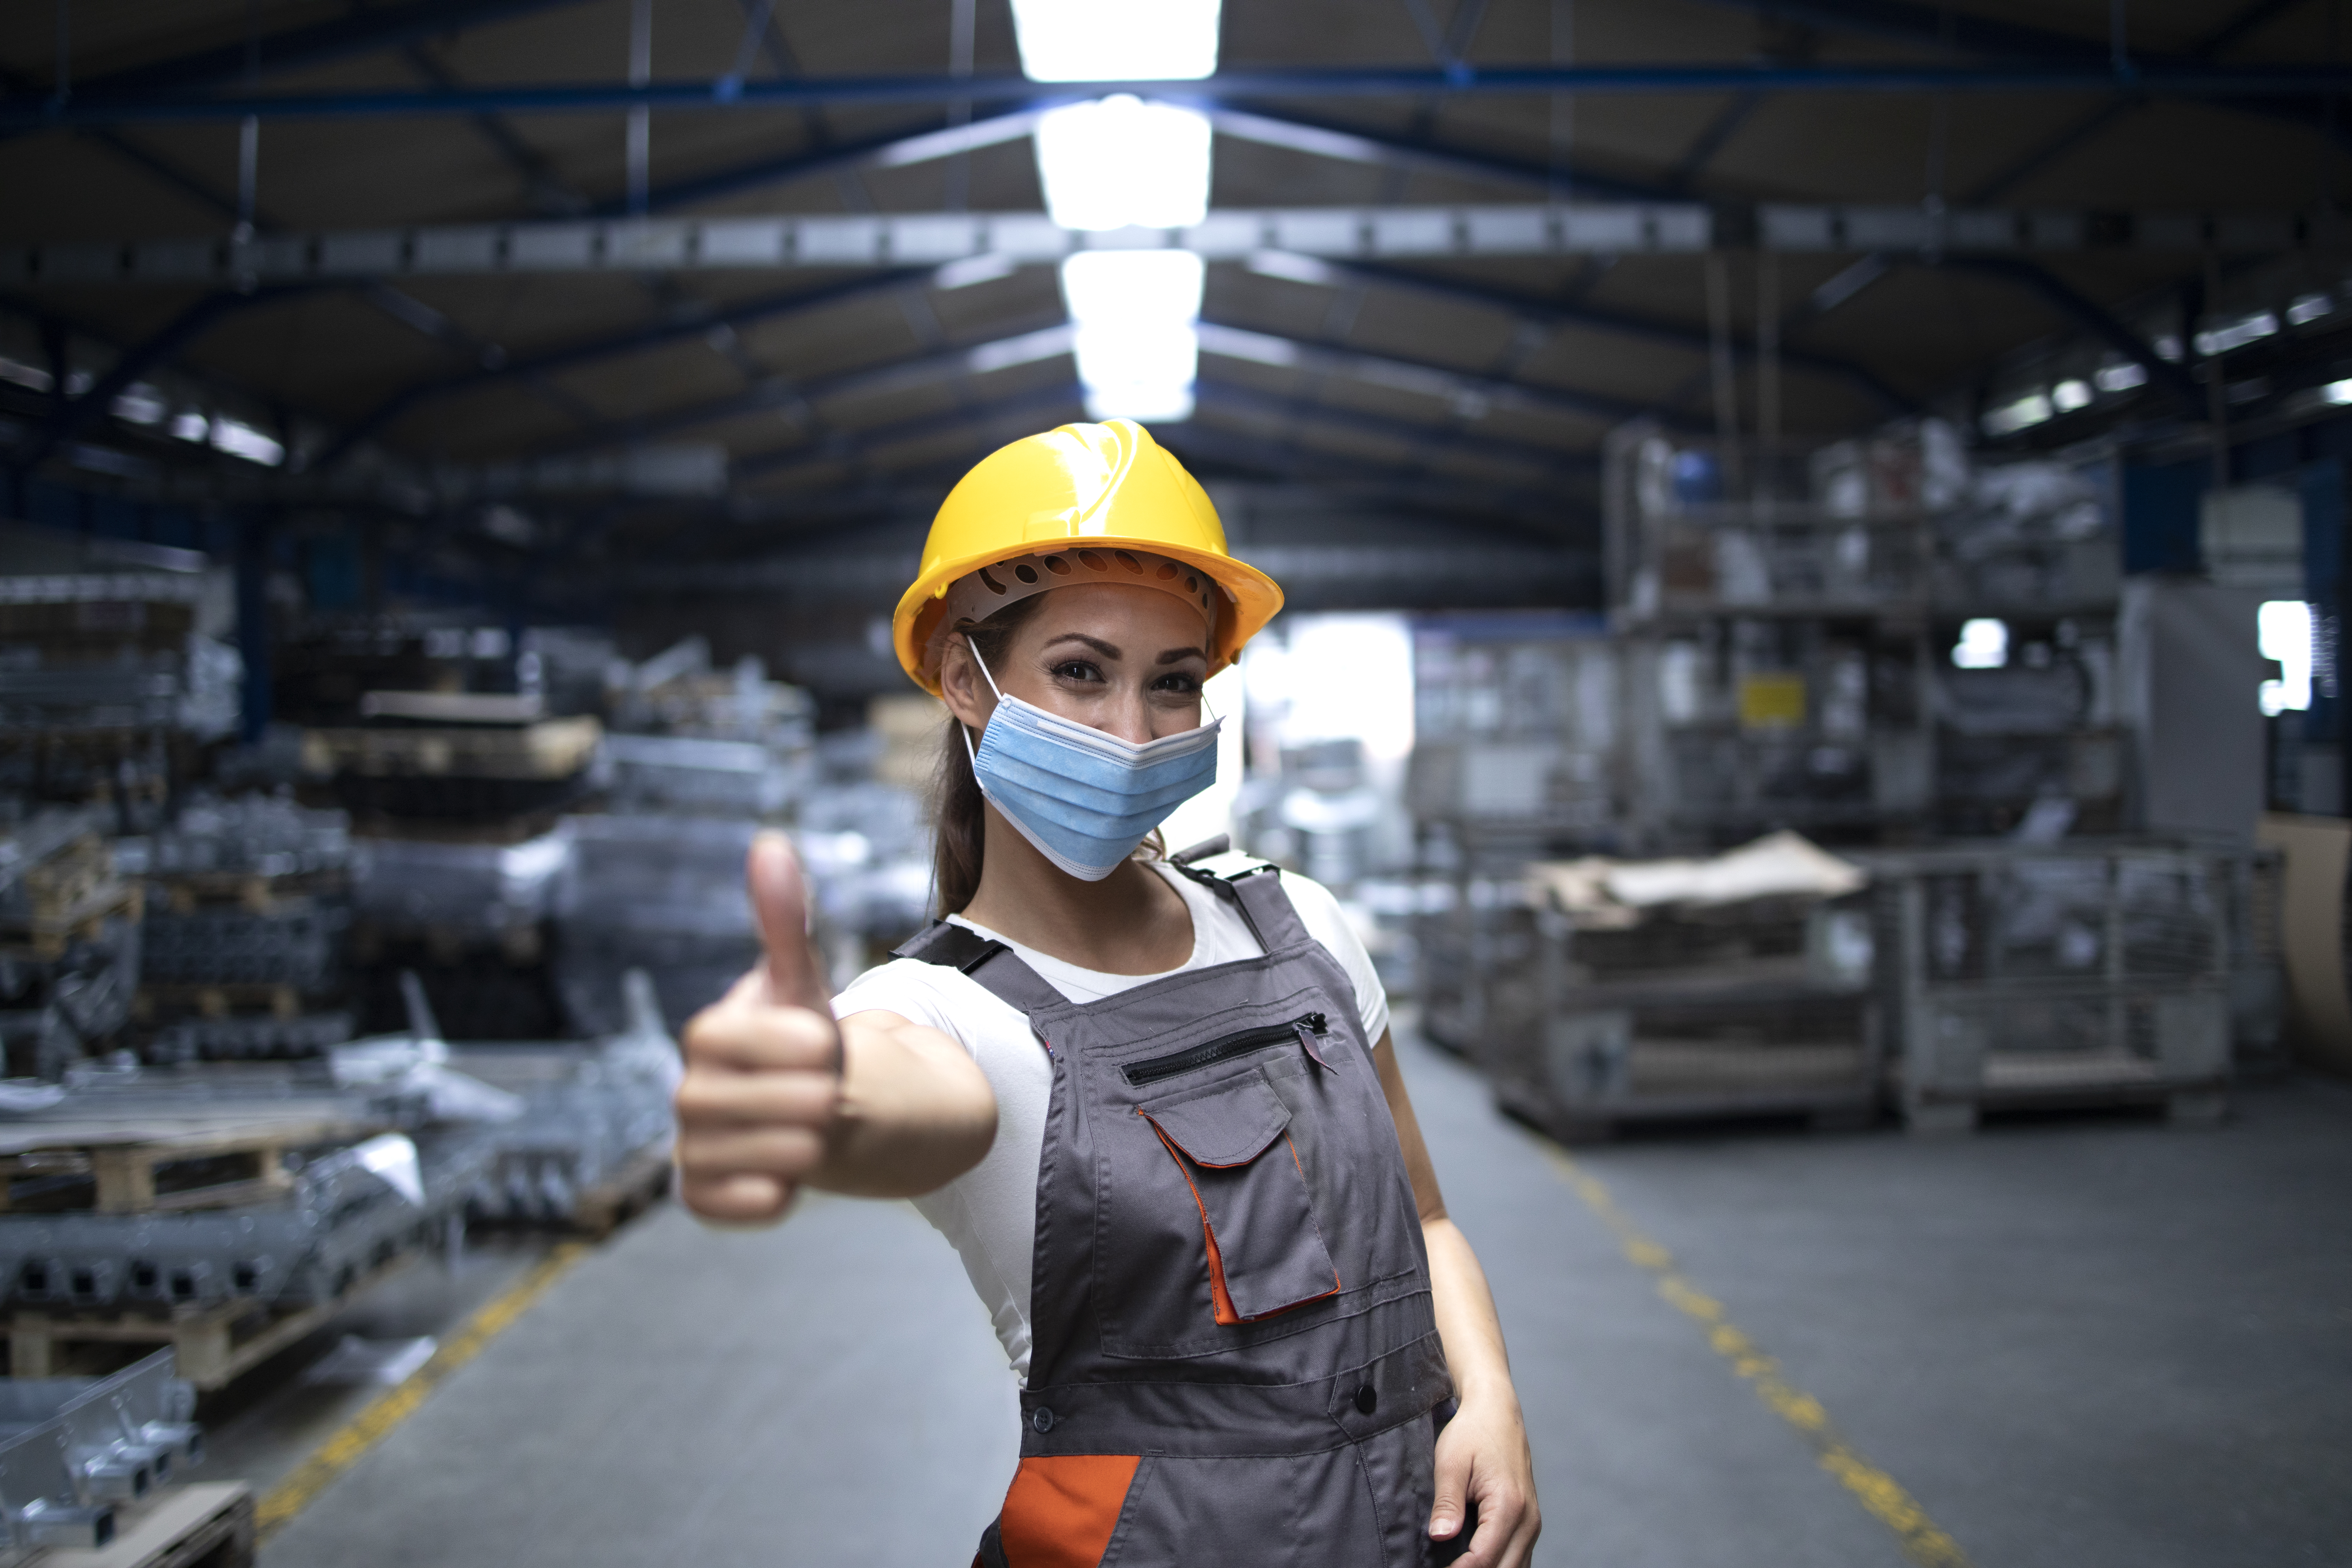 woman-standing-in-factory-hall-and-showing-thumbs-up-while-wearing-hygienic-mask-as-prevention-against-corona-virus.jpg